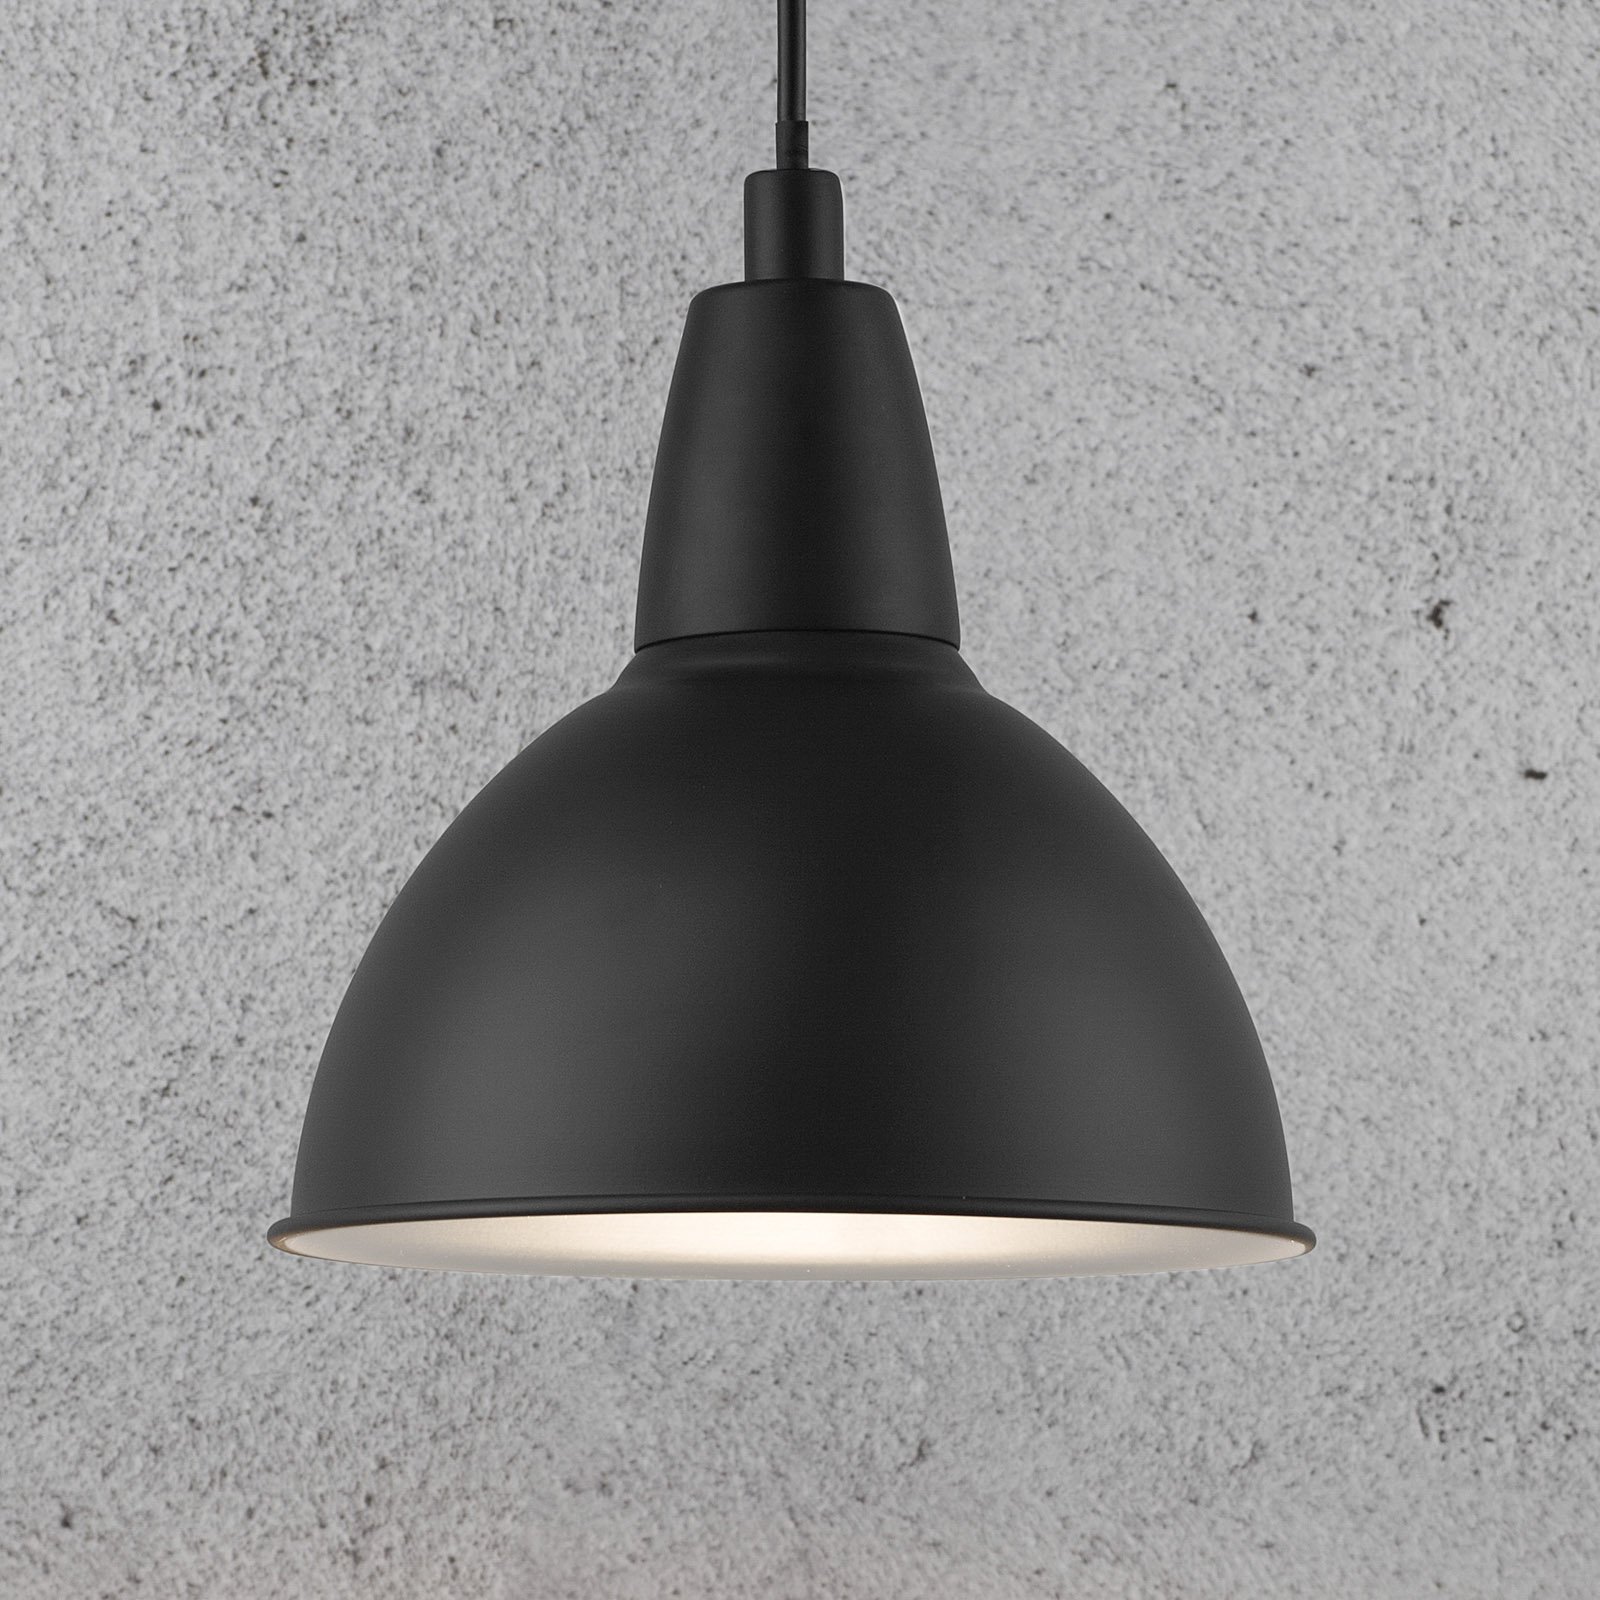 Trude hanging light with metal lampshade, black